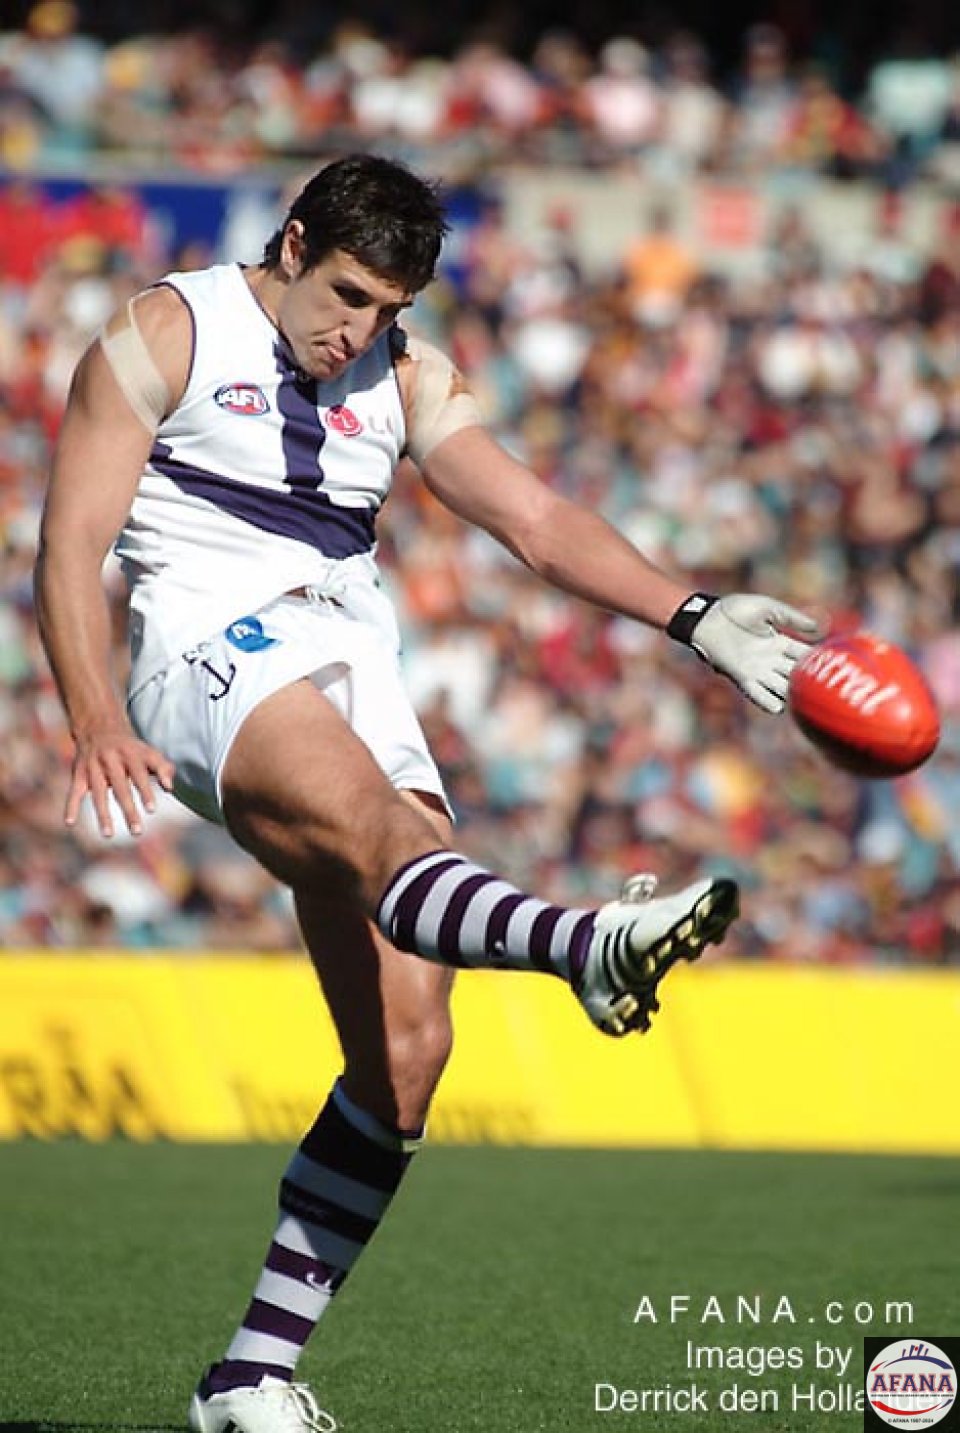 [b]Matthew Pavlich drives deep into the forward attacking zone for the Dockers[/b]